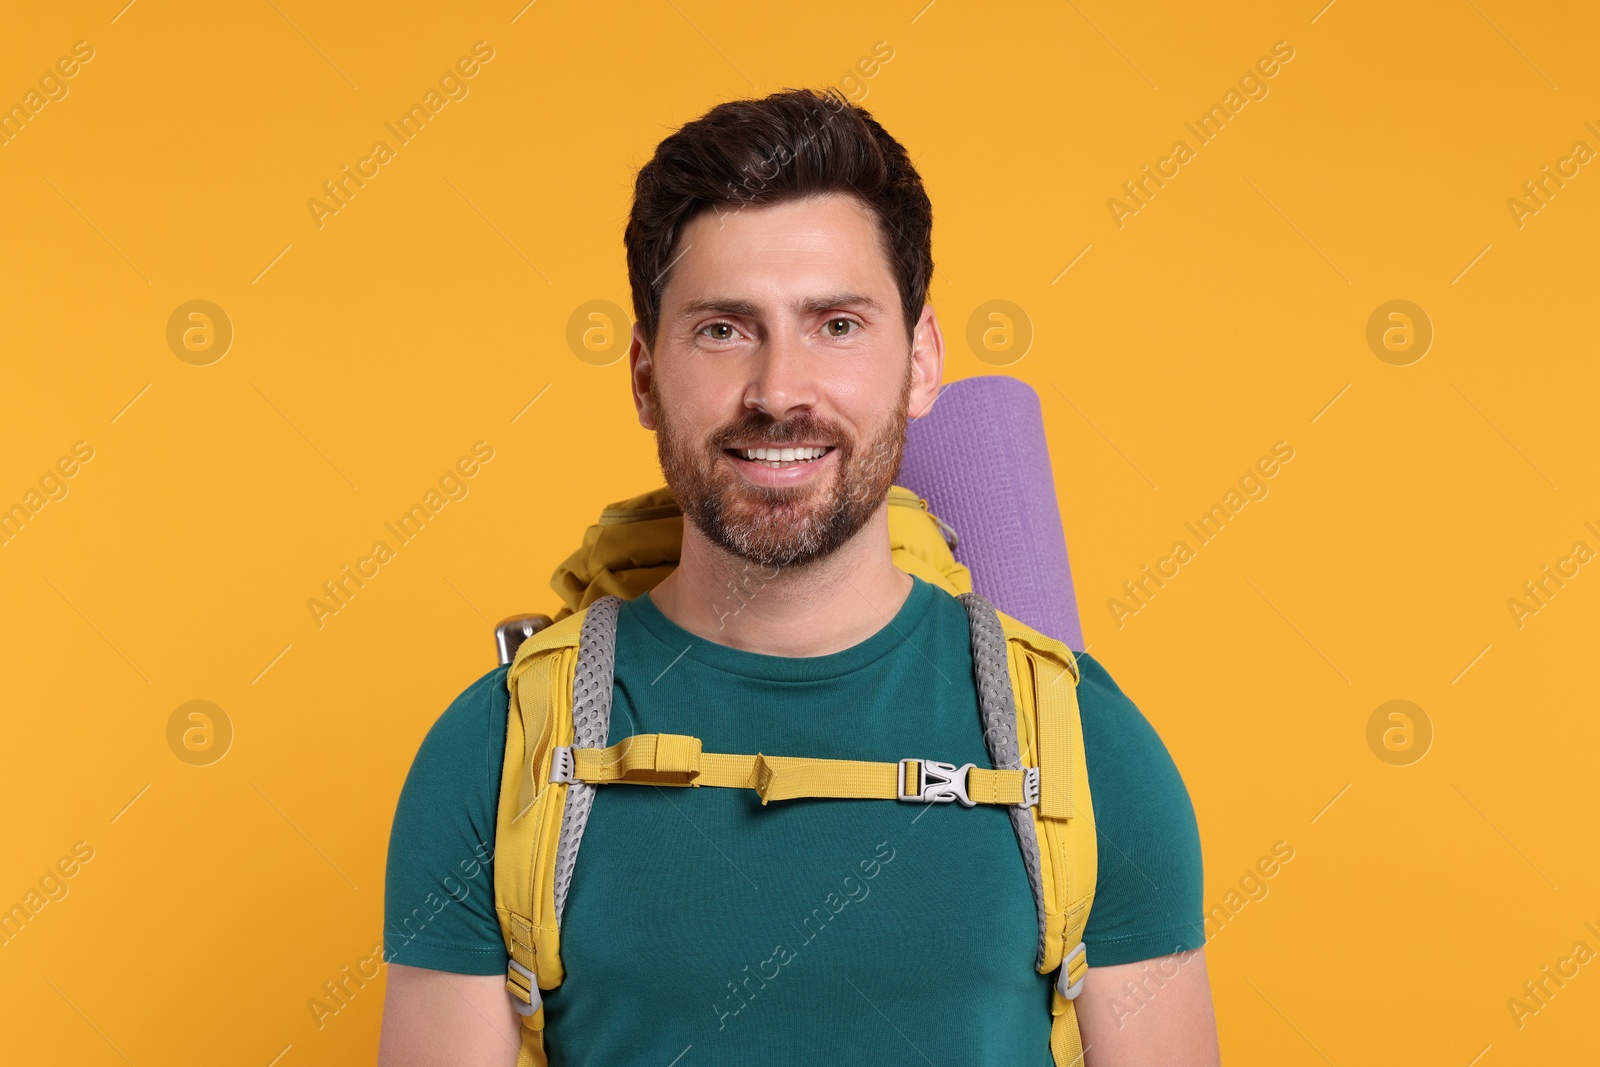 Photo of Happy man with backpack on orange background. Active tourism